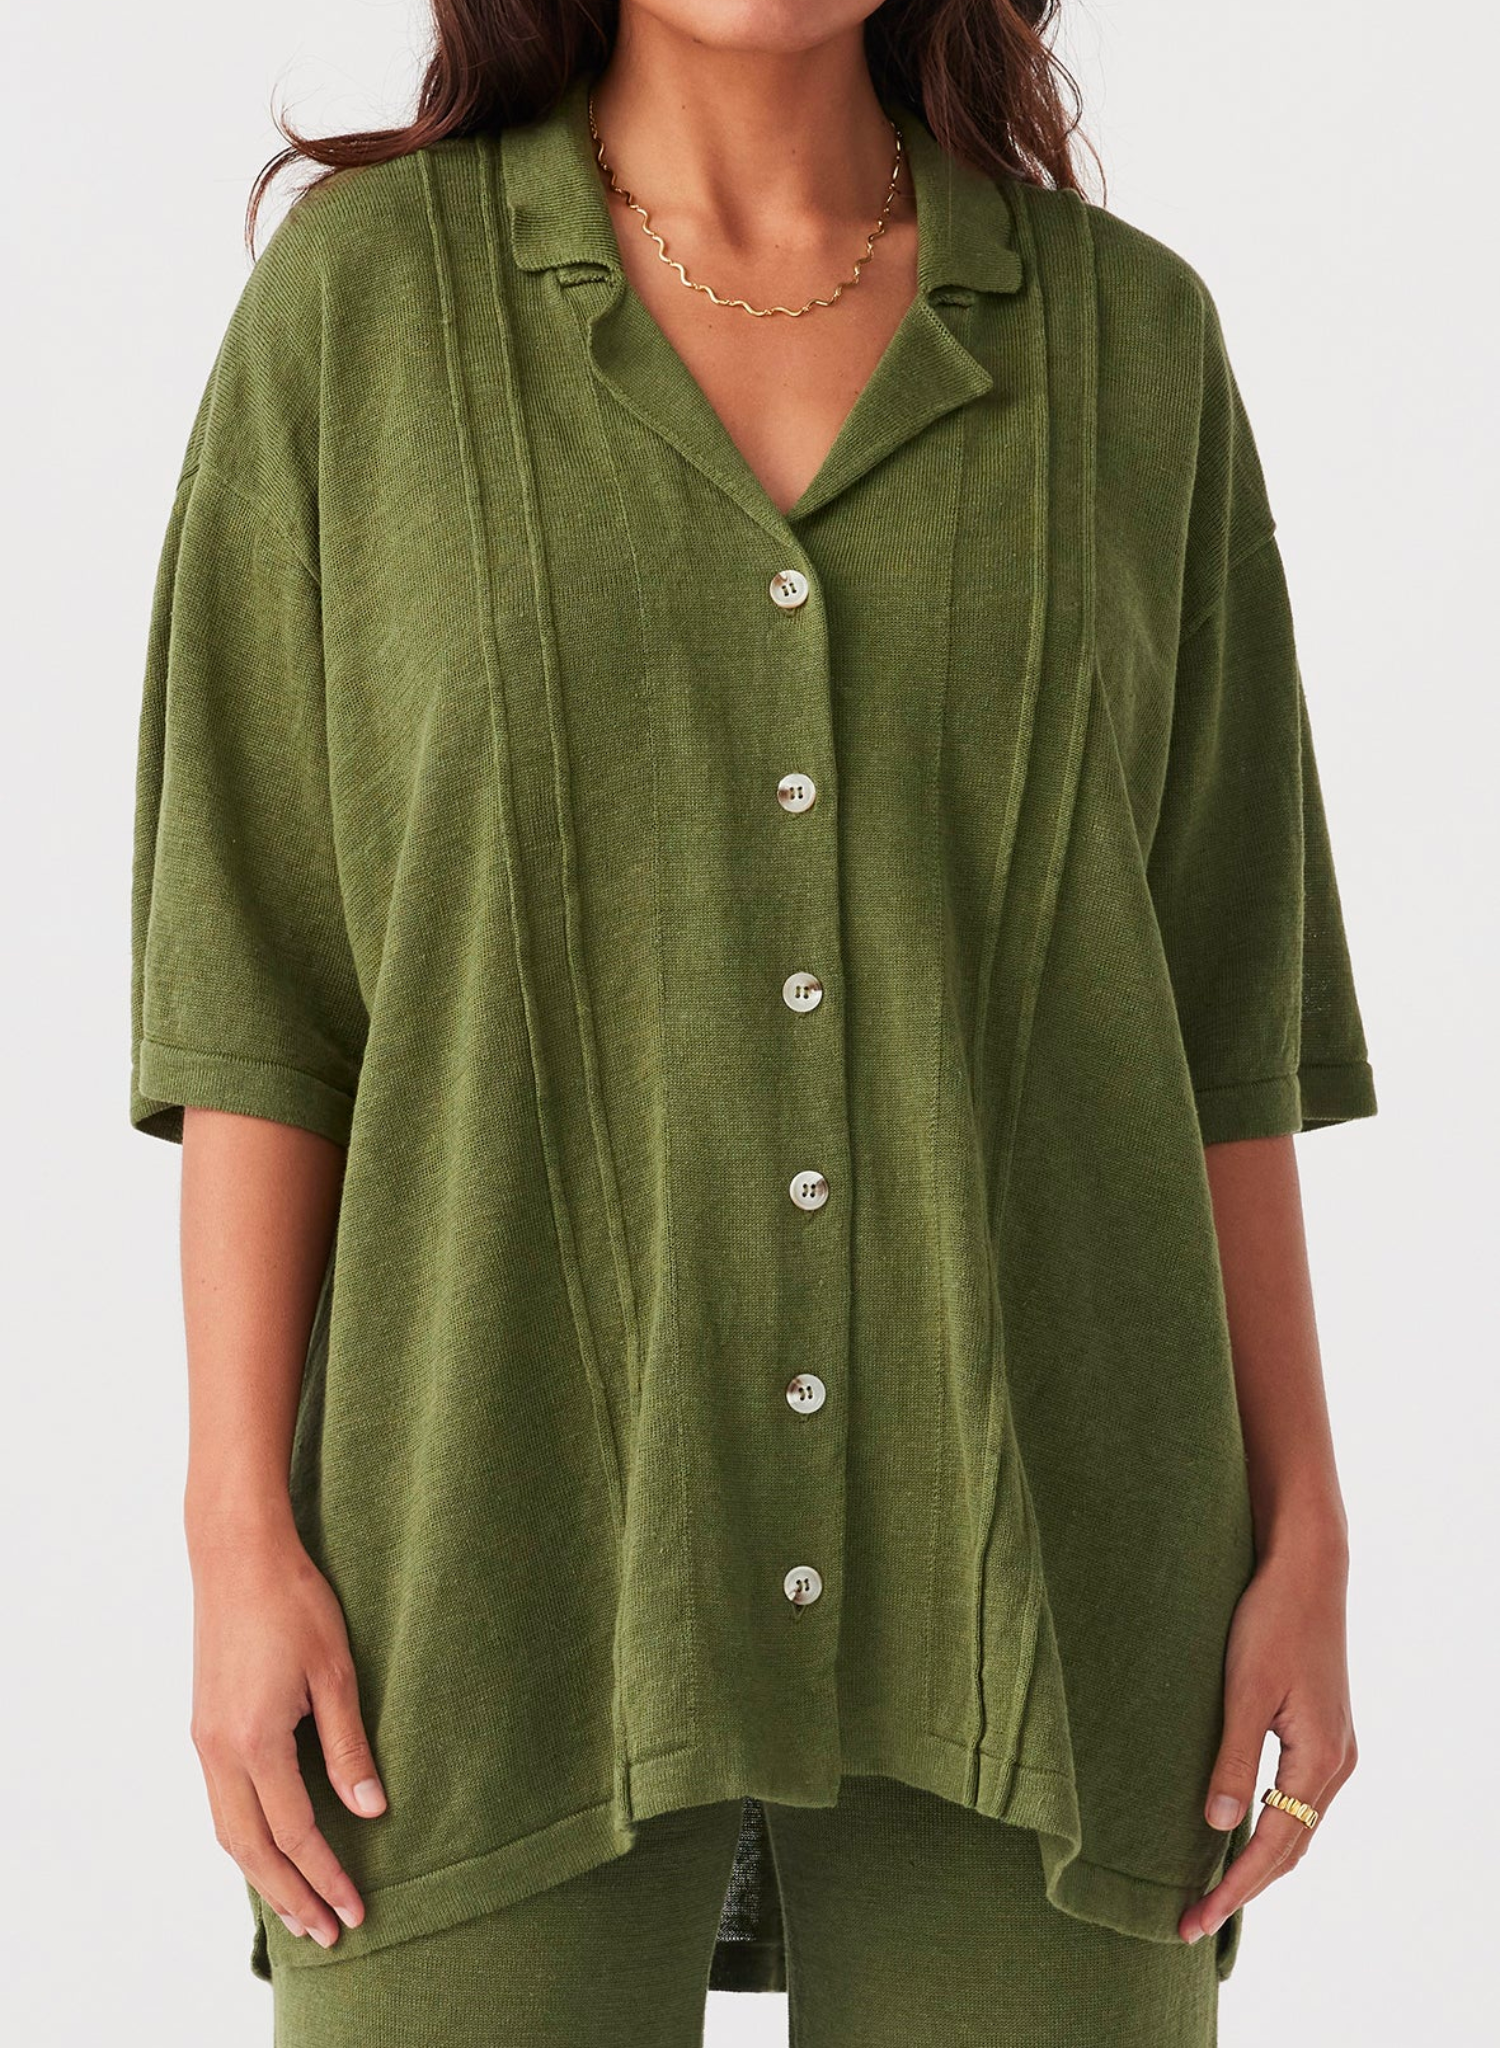 Darcy Shirt in Caper